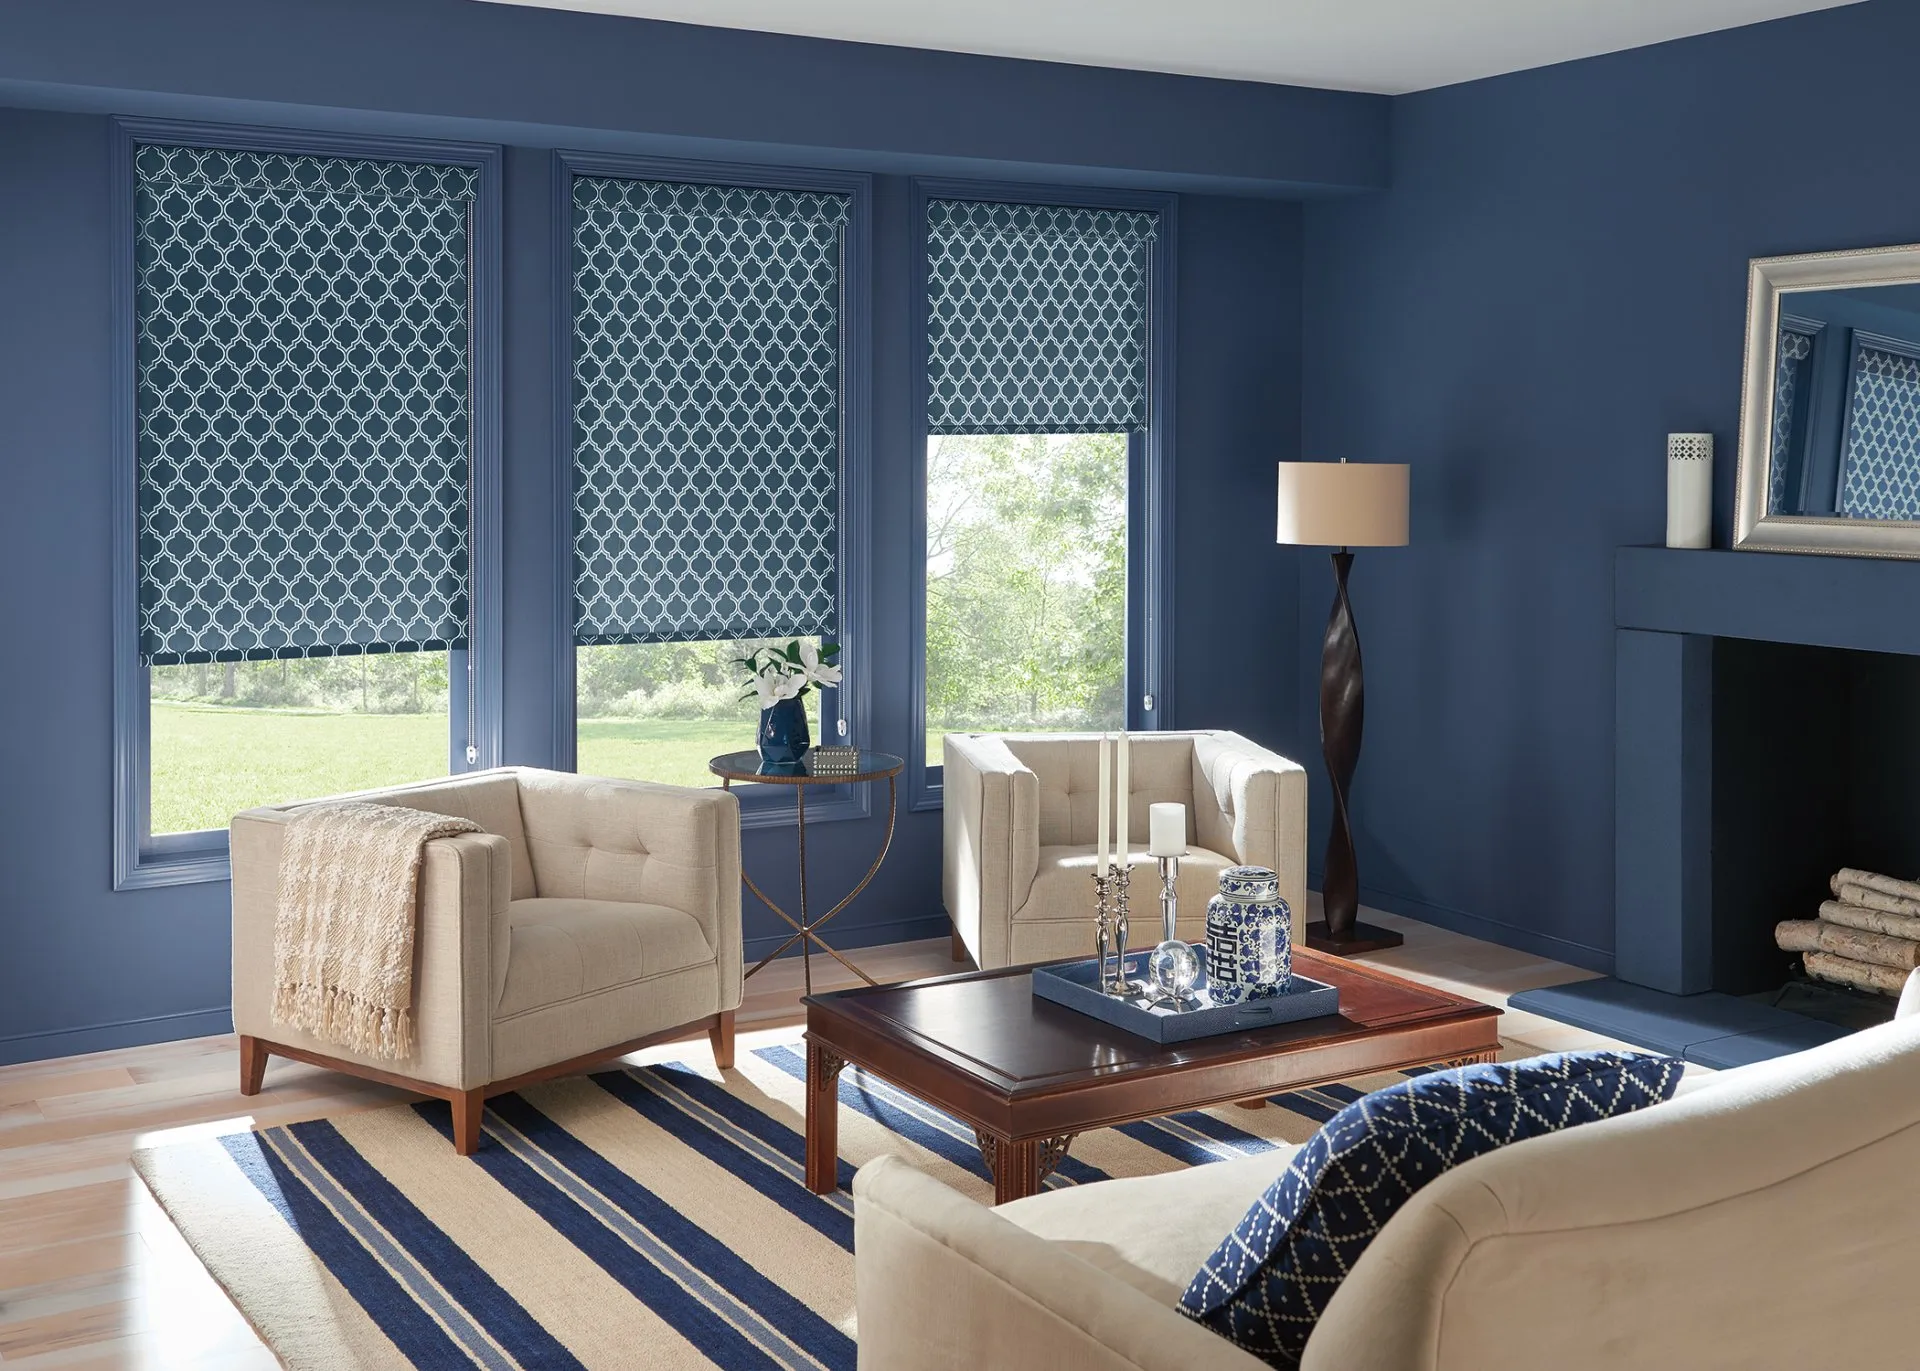 Custom Blinds | Residential Blinds | Georgia Blinds and Classic Glass Tinters